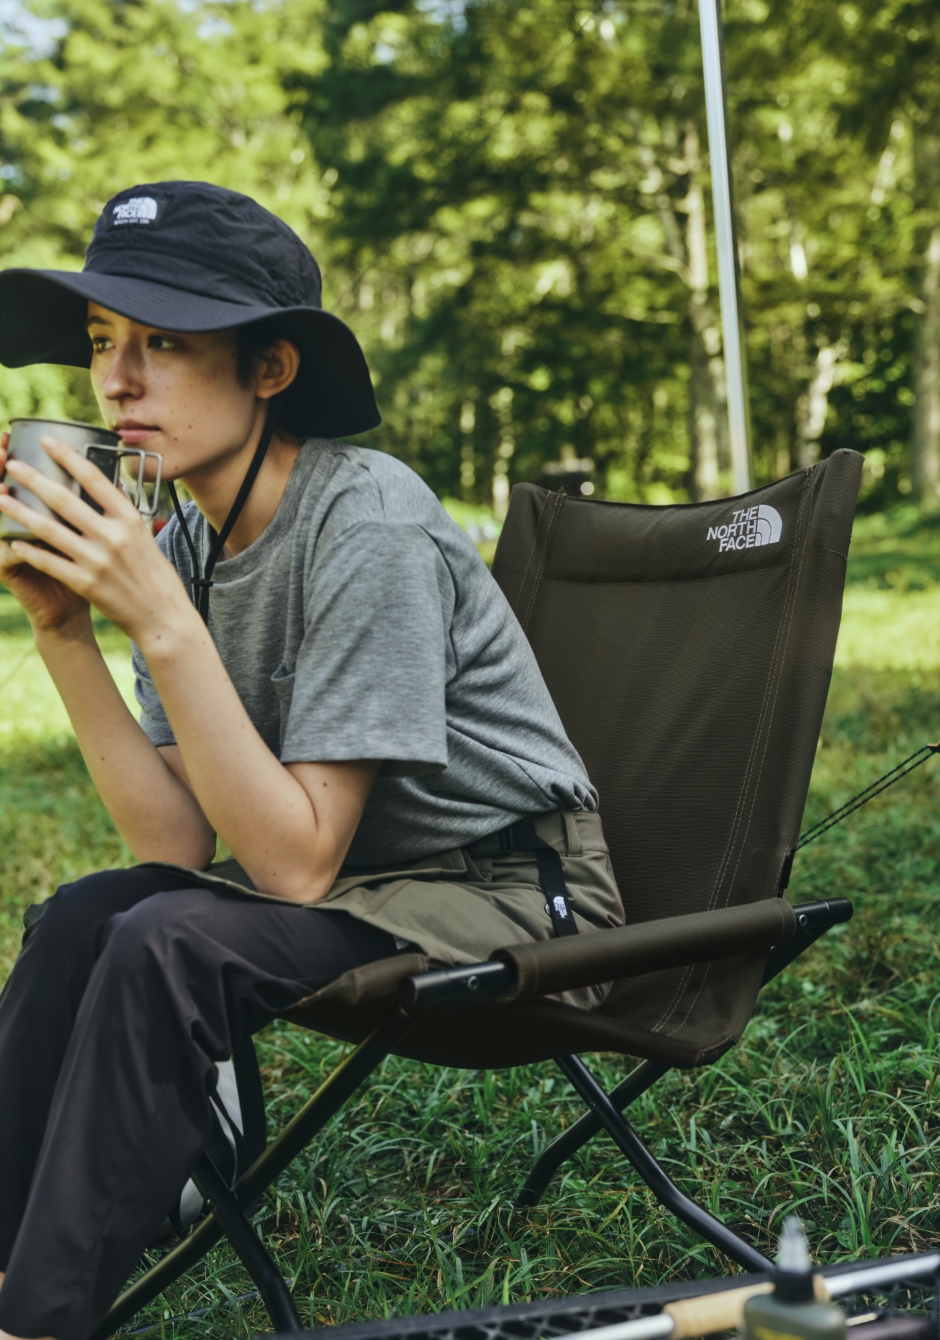 TNF Camp Chair | Online Camp Store | THE NORTH FACE CAMP